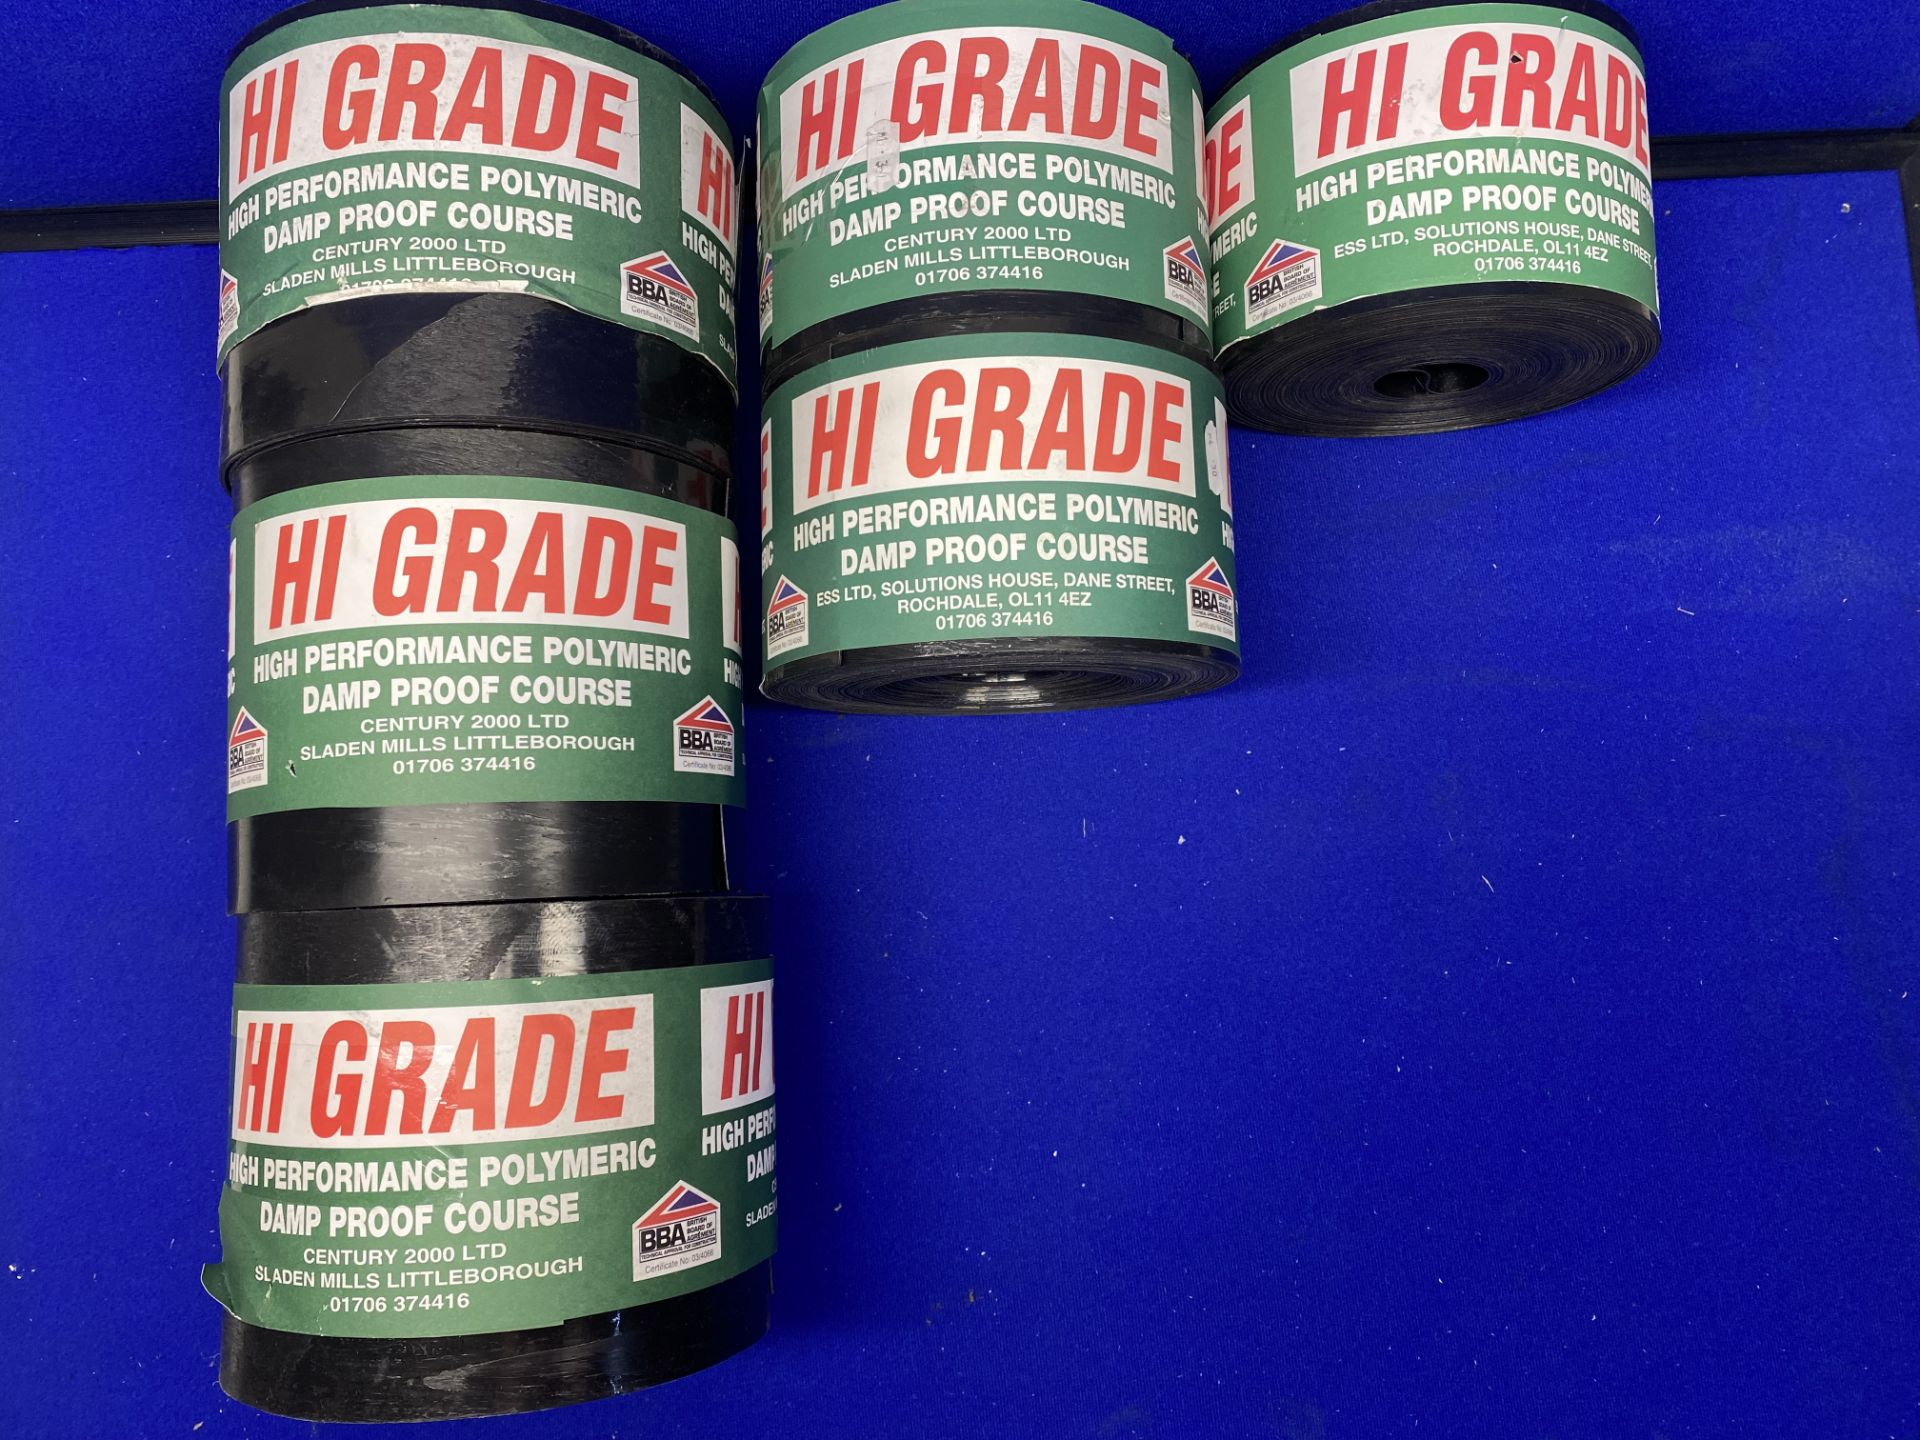 9 x Rolls Of Various Sized Hi Grade High Performance Polymeric Damp Proof Course As Seen On Photos - Image 8 of 14